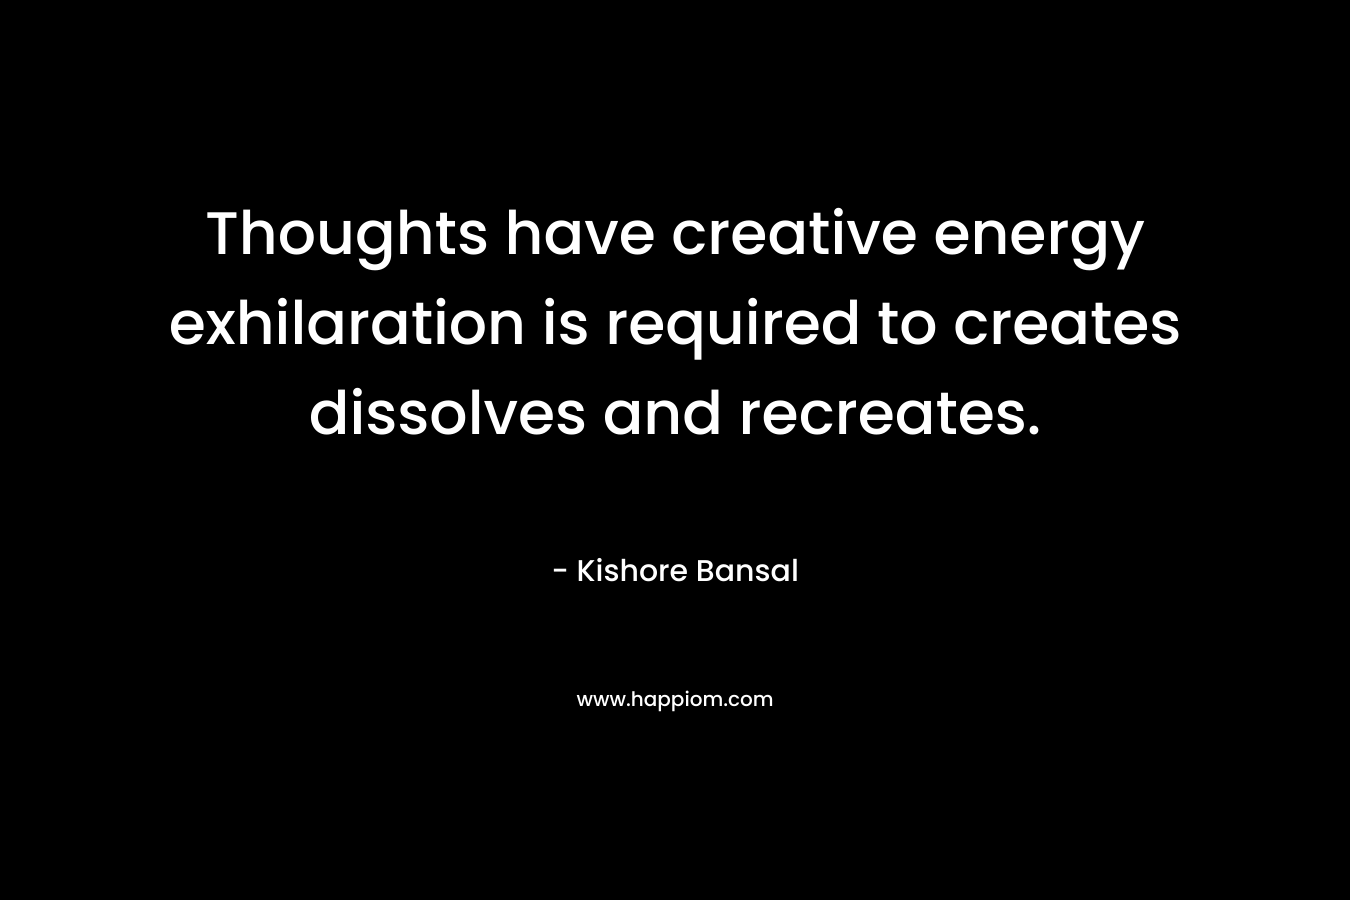 Thoughts have creative energy exhilaration is required to creates dissolves and recreates.